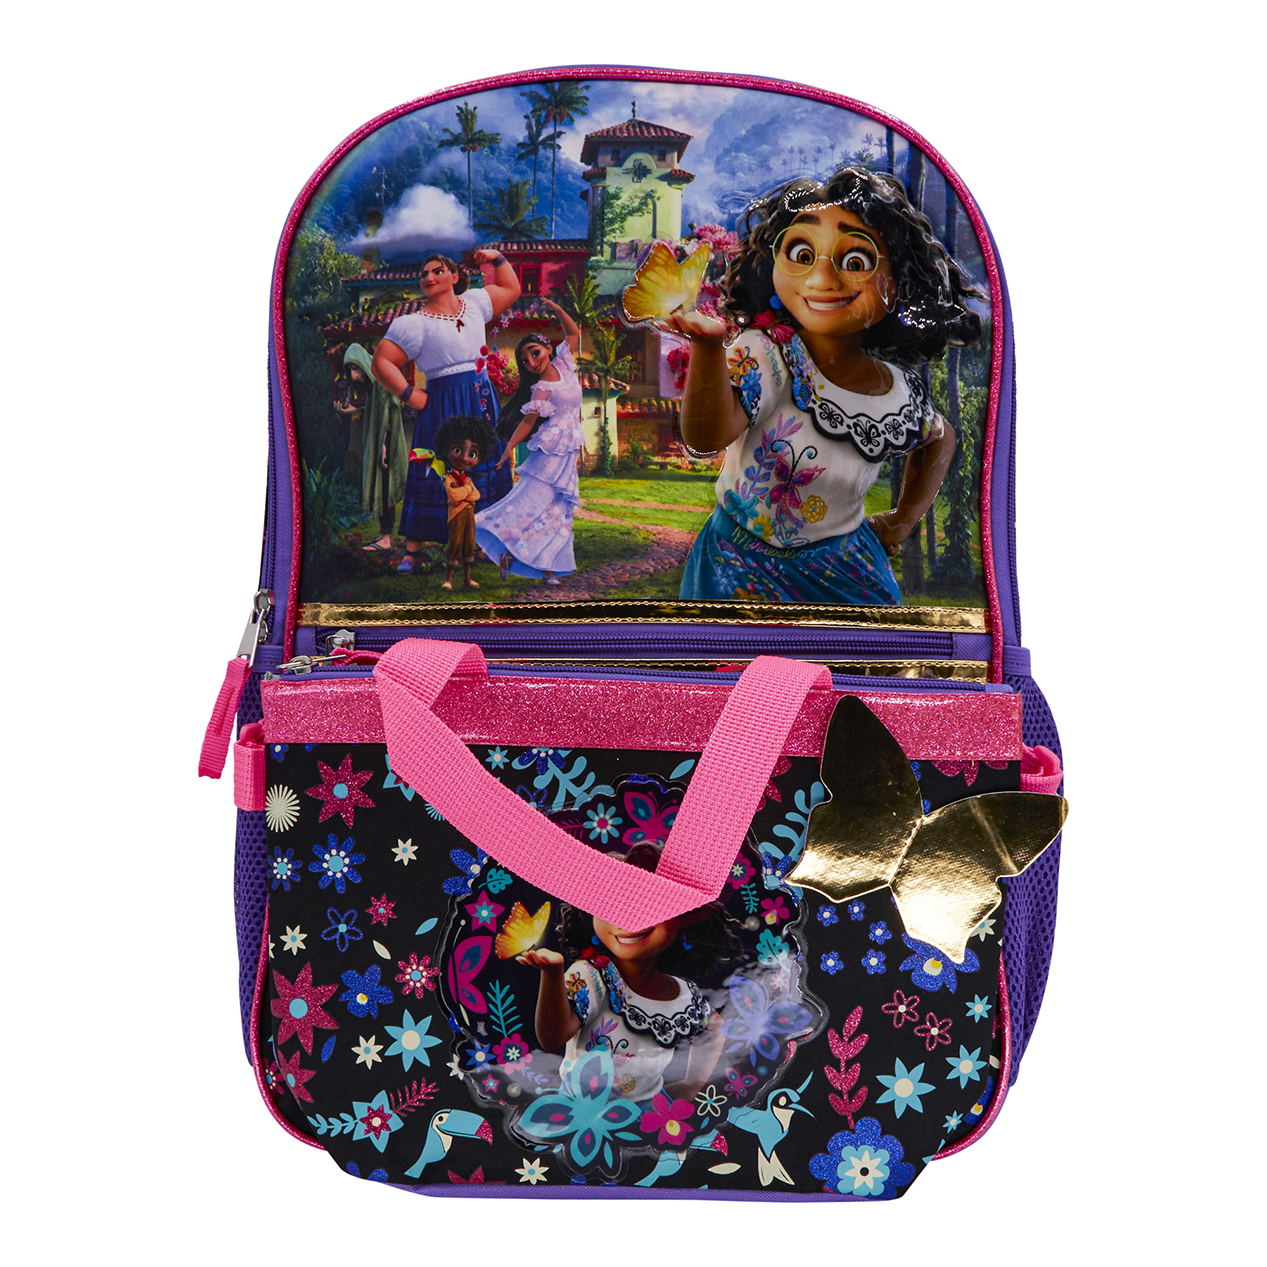 Disney Encanto Magic Family Girls 17" Laptop Backpack 2-Piece Set with Lunch Tote Bag, Purple Pink - image 3 of 5